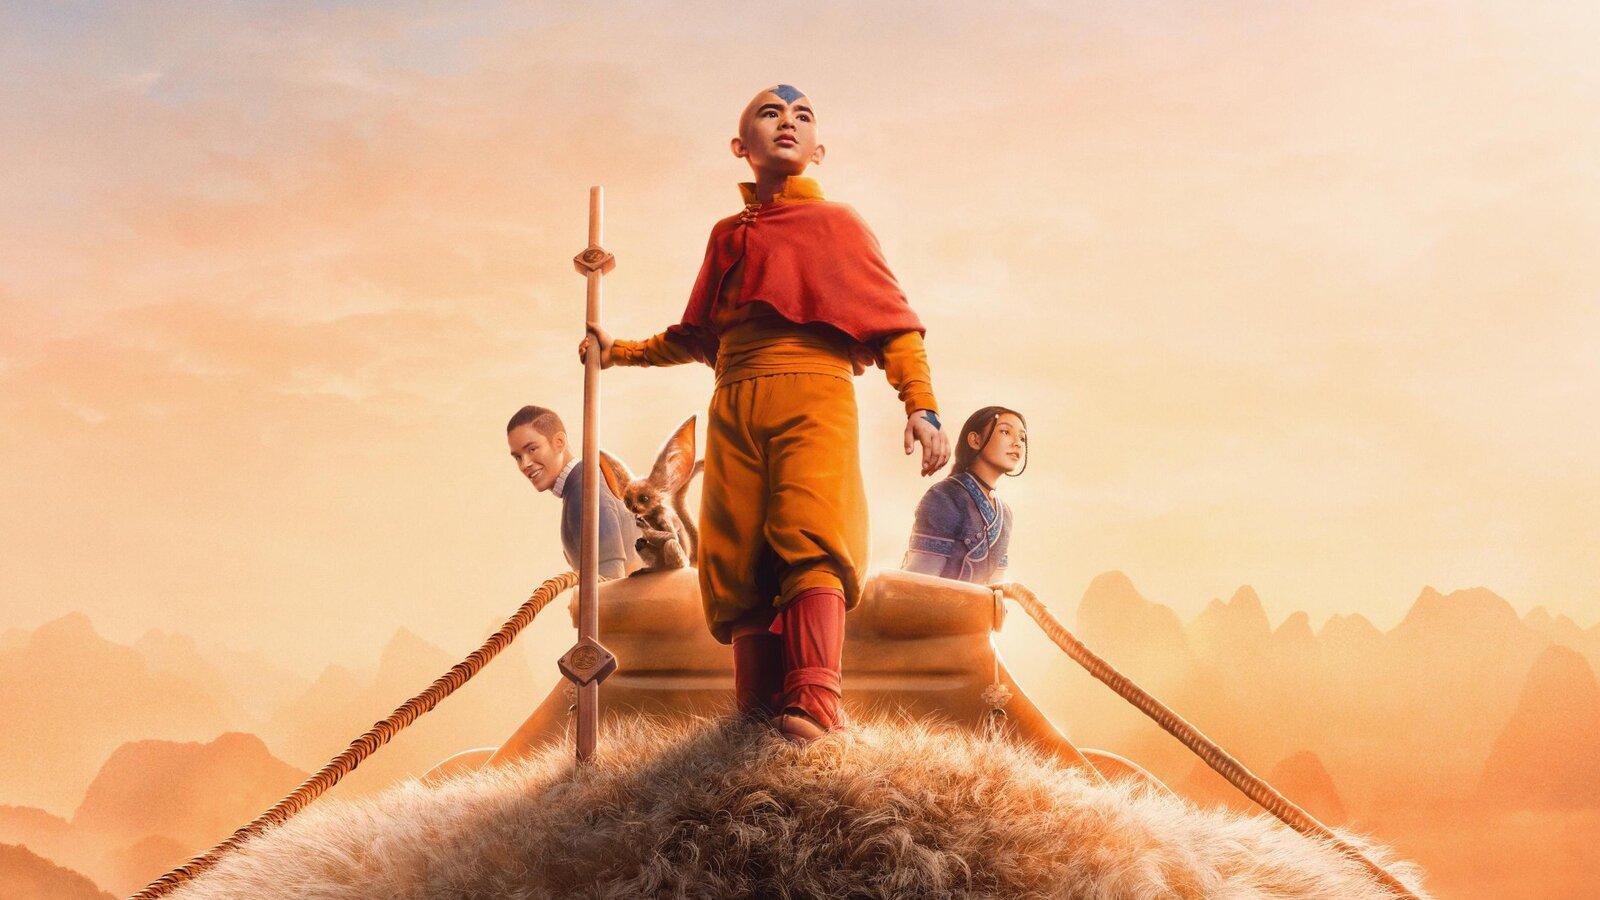 Netflix’s Avatar The Last Airbender drops new actionfilled trailer